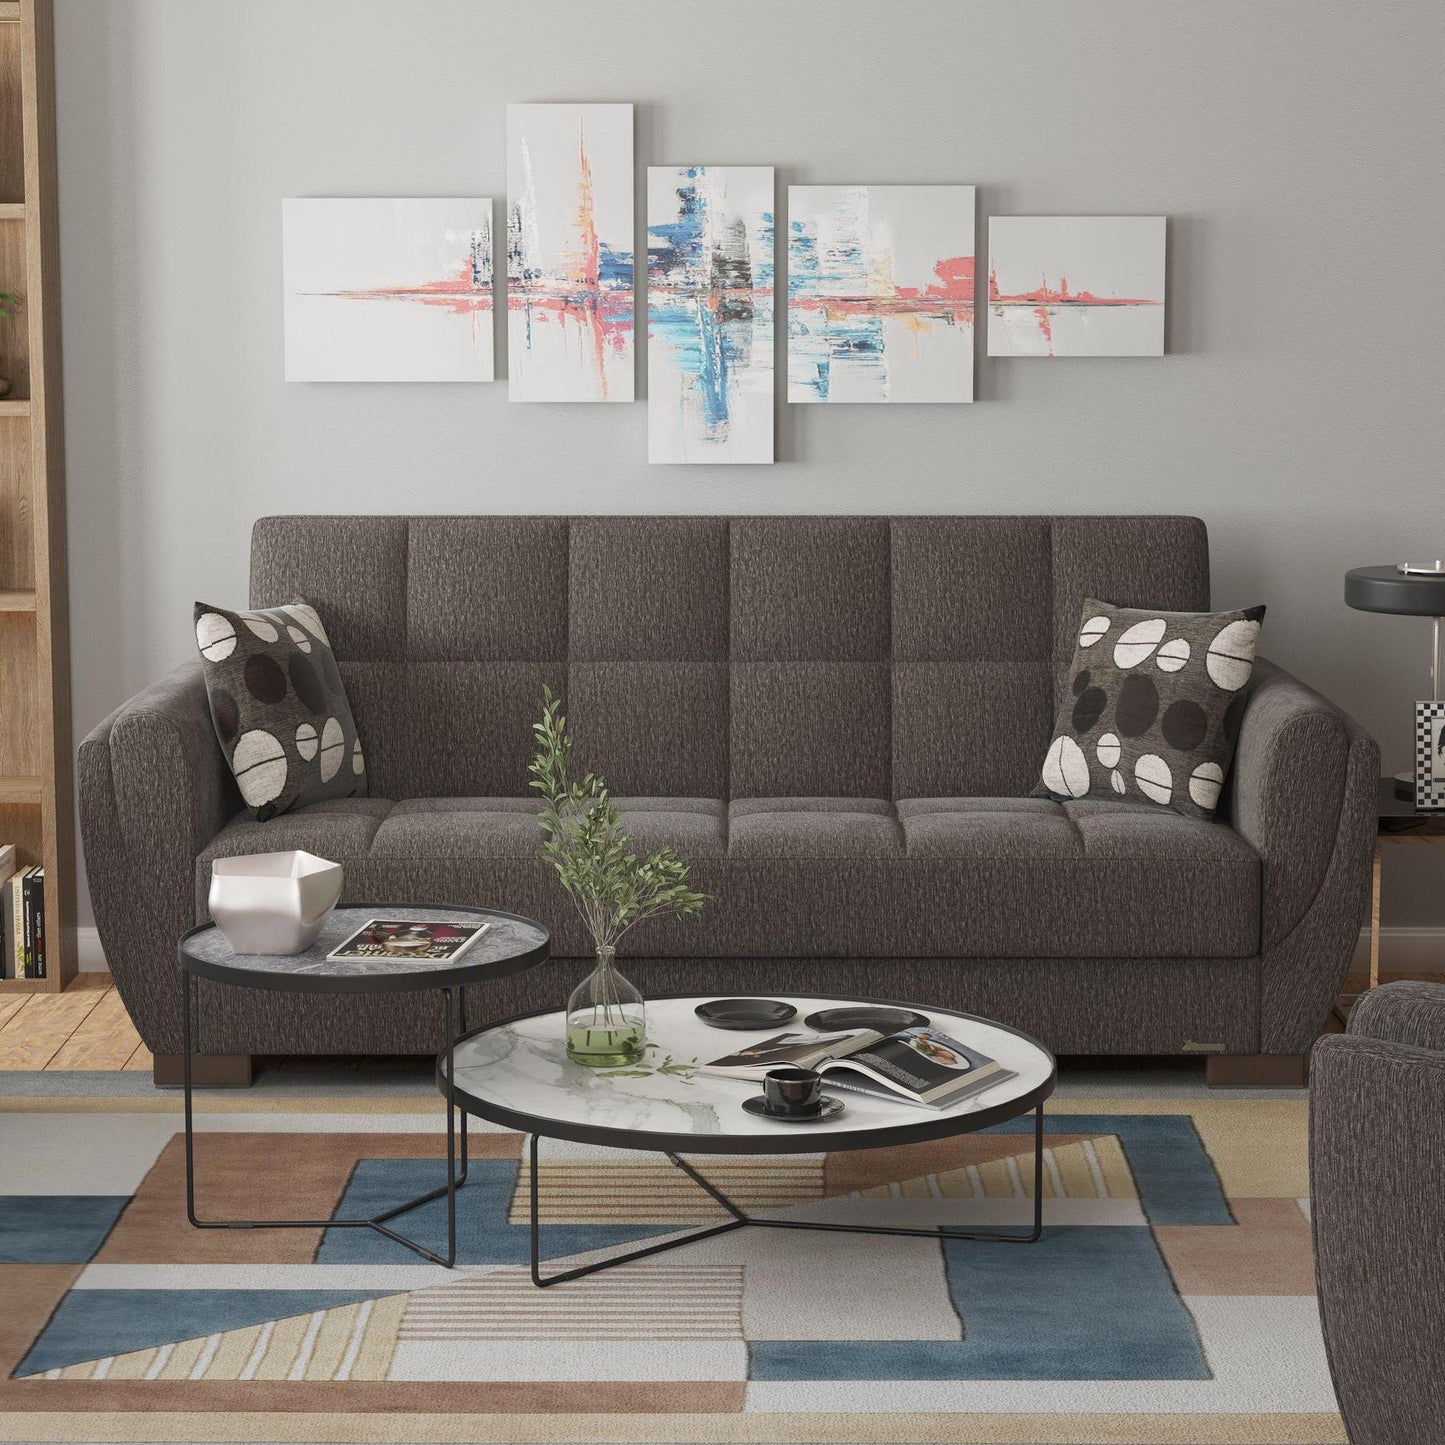 Modern design, Dark Slate Gray , Chenille upholstered convertible sleeper Sofabed with underseat storage from Voyage Shelter by Ottomanson in living room lifestyle setting by itself. This Sofabed measures 94 inches width by 36 inches depth by 41 inches height.